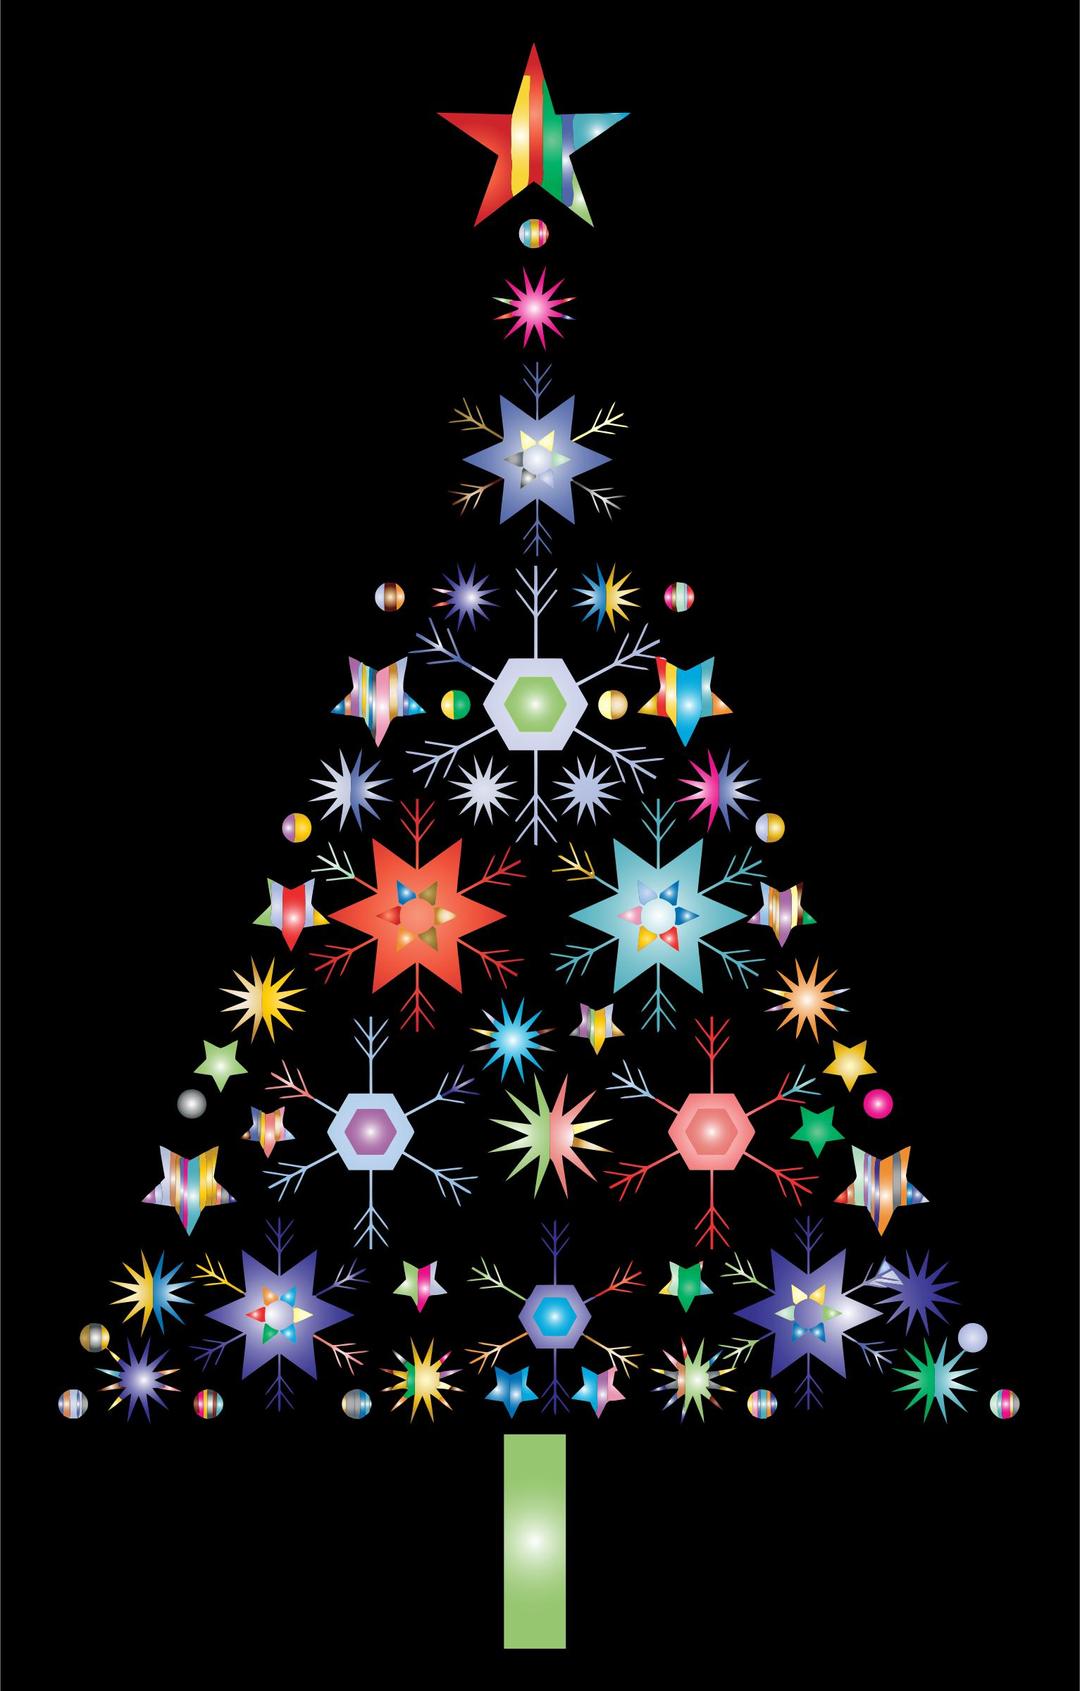 Abstract Snowflake Christmas Tree By Karen Arnold Prismatic png transparent